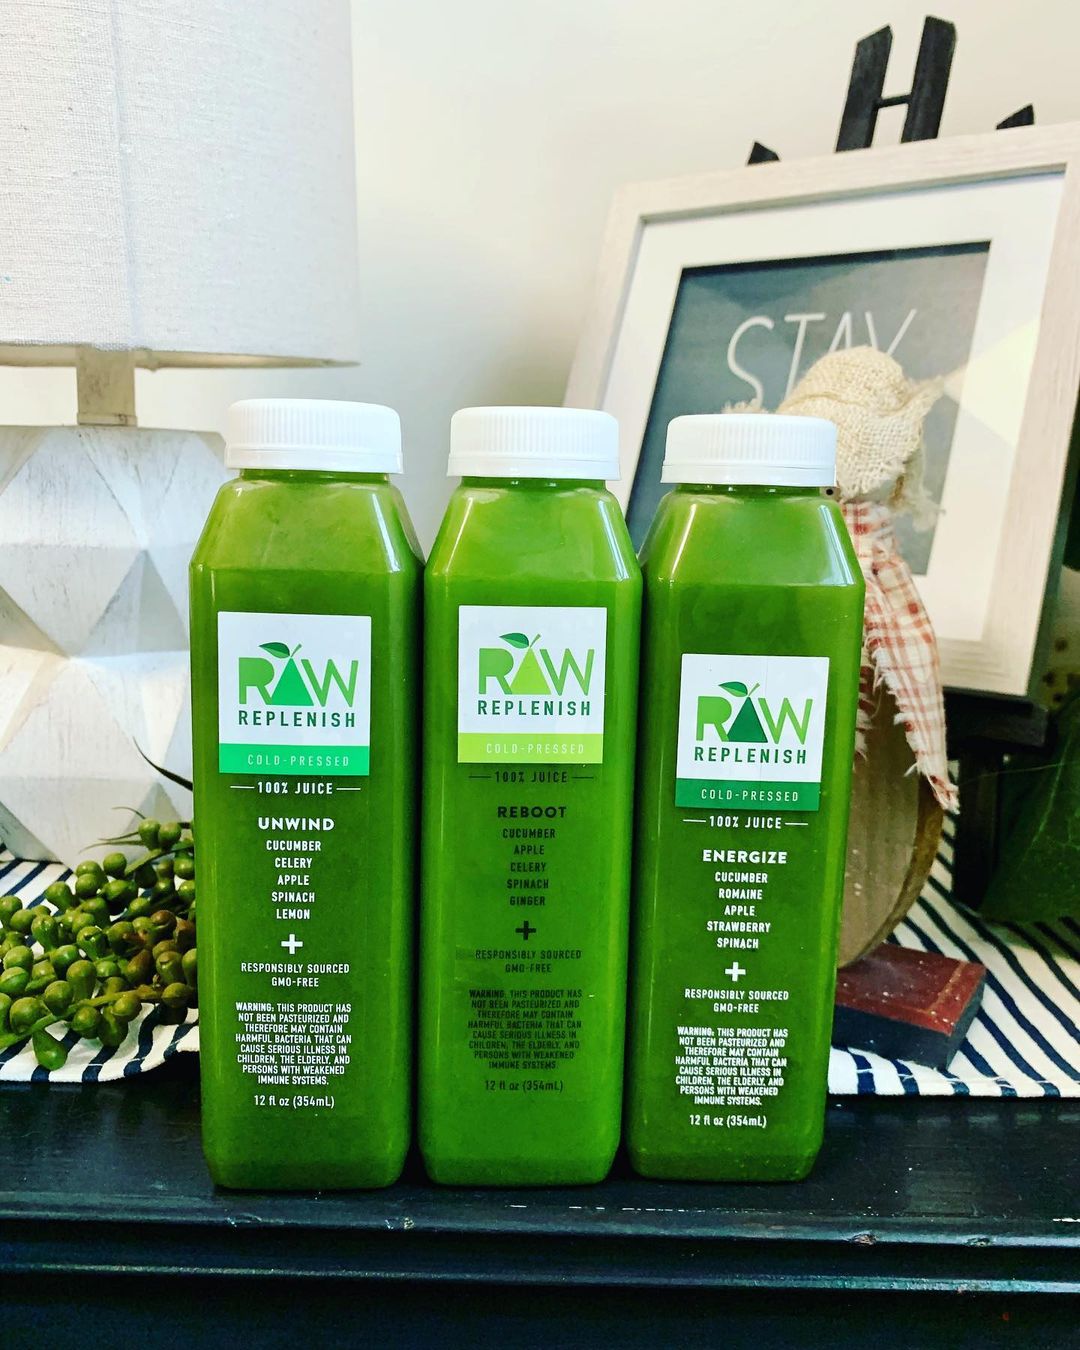 Cold-pressed juice franchise image of green juices